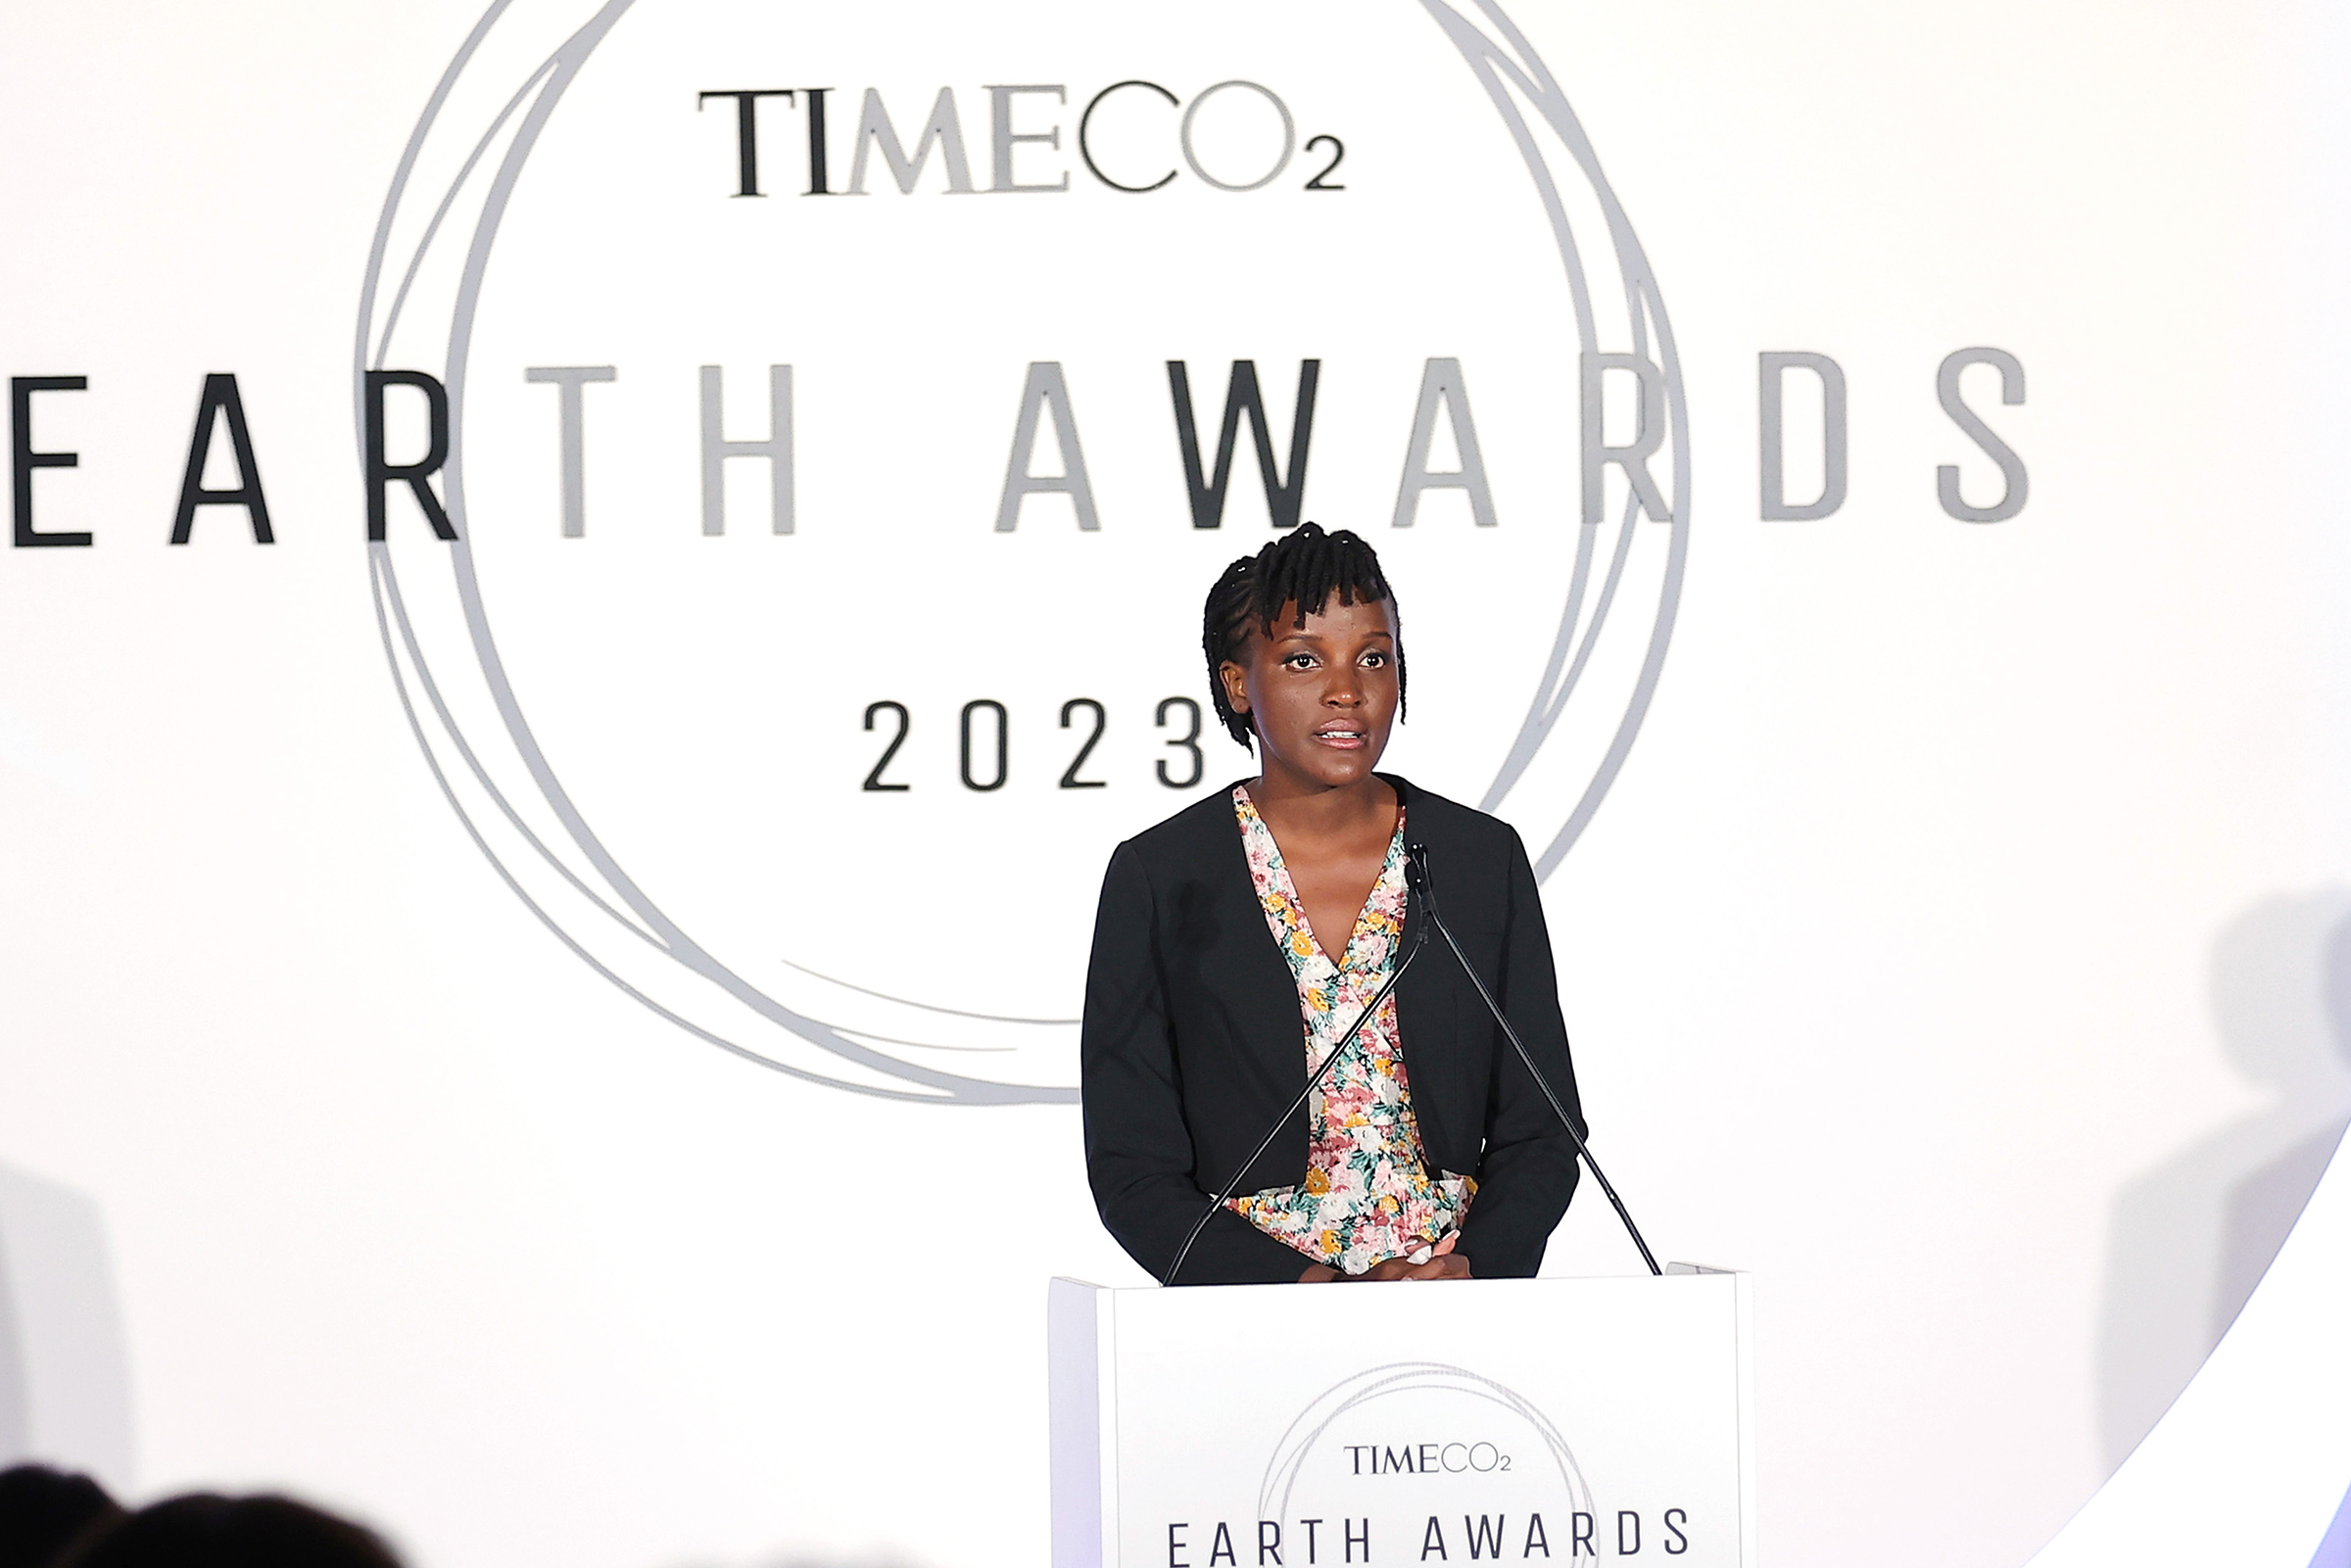 Vanessa Nakate speaks at the TIME CO2 Earth Awards Gala in New York City on April 25, 2023. (Mike Coppola—Getty Images for TIME)